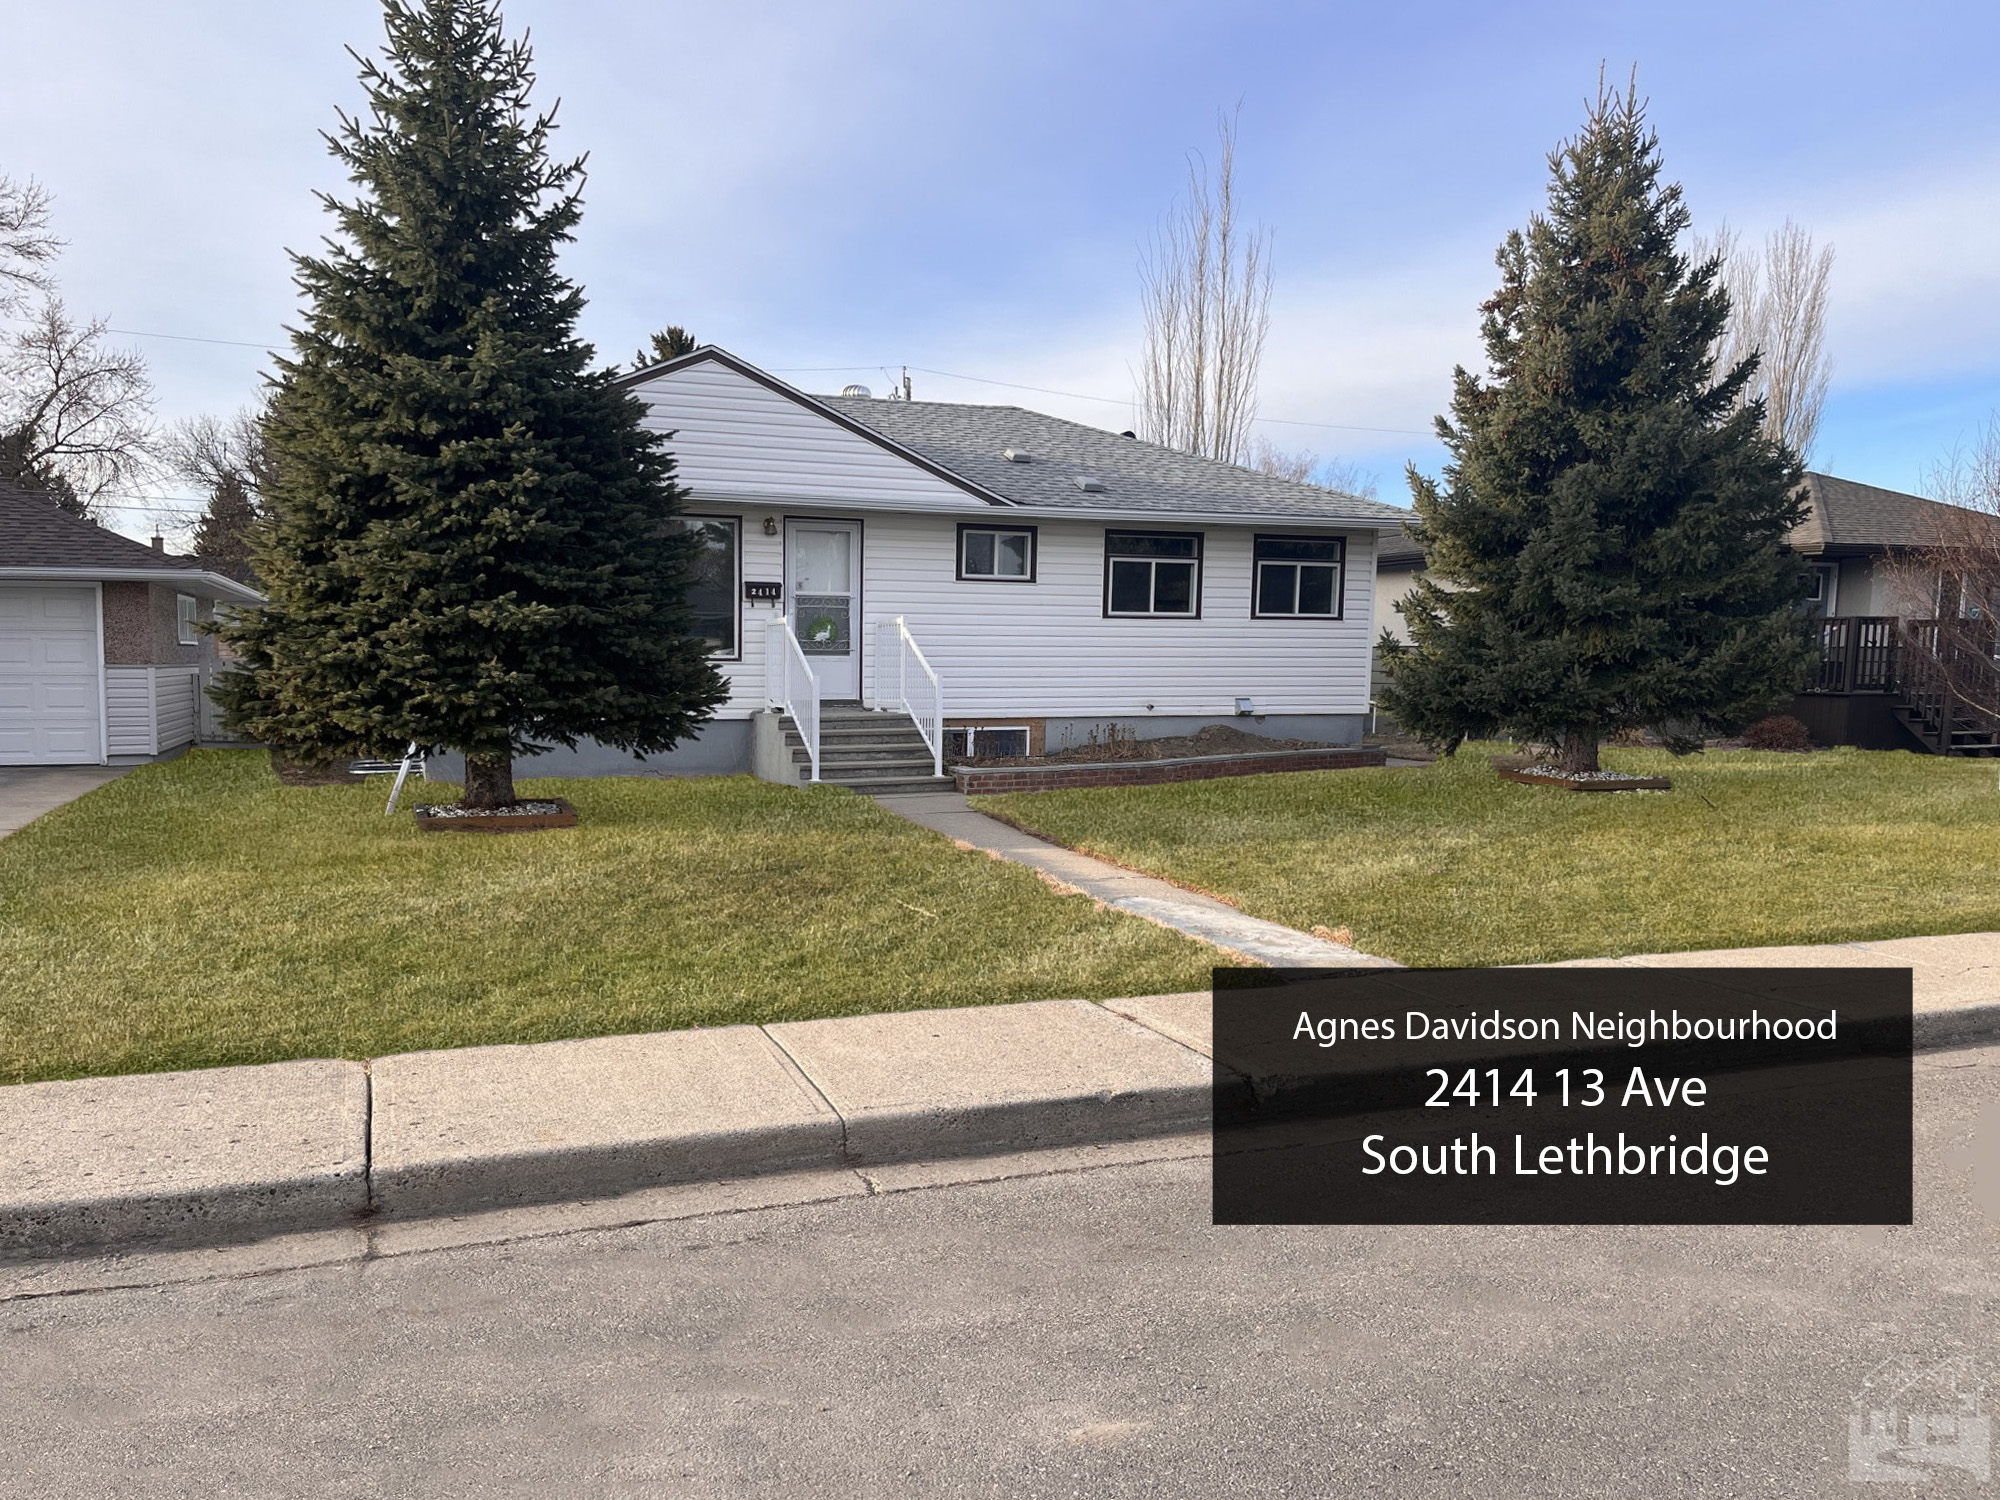 2414 13 Ave South Lethbridge (Mainfloor Suite) Cover image